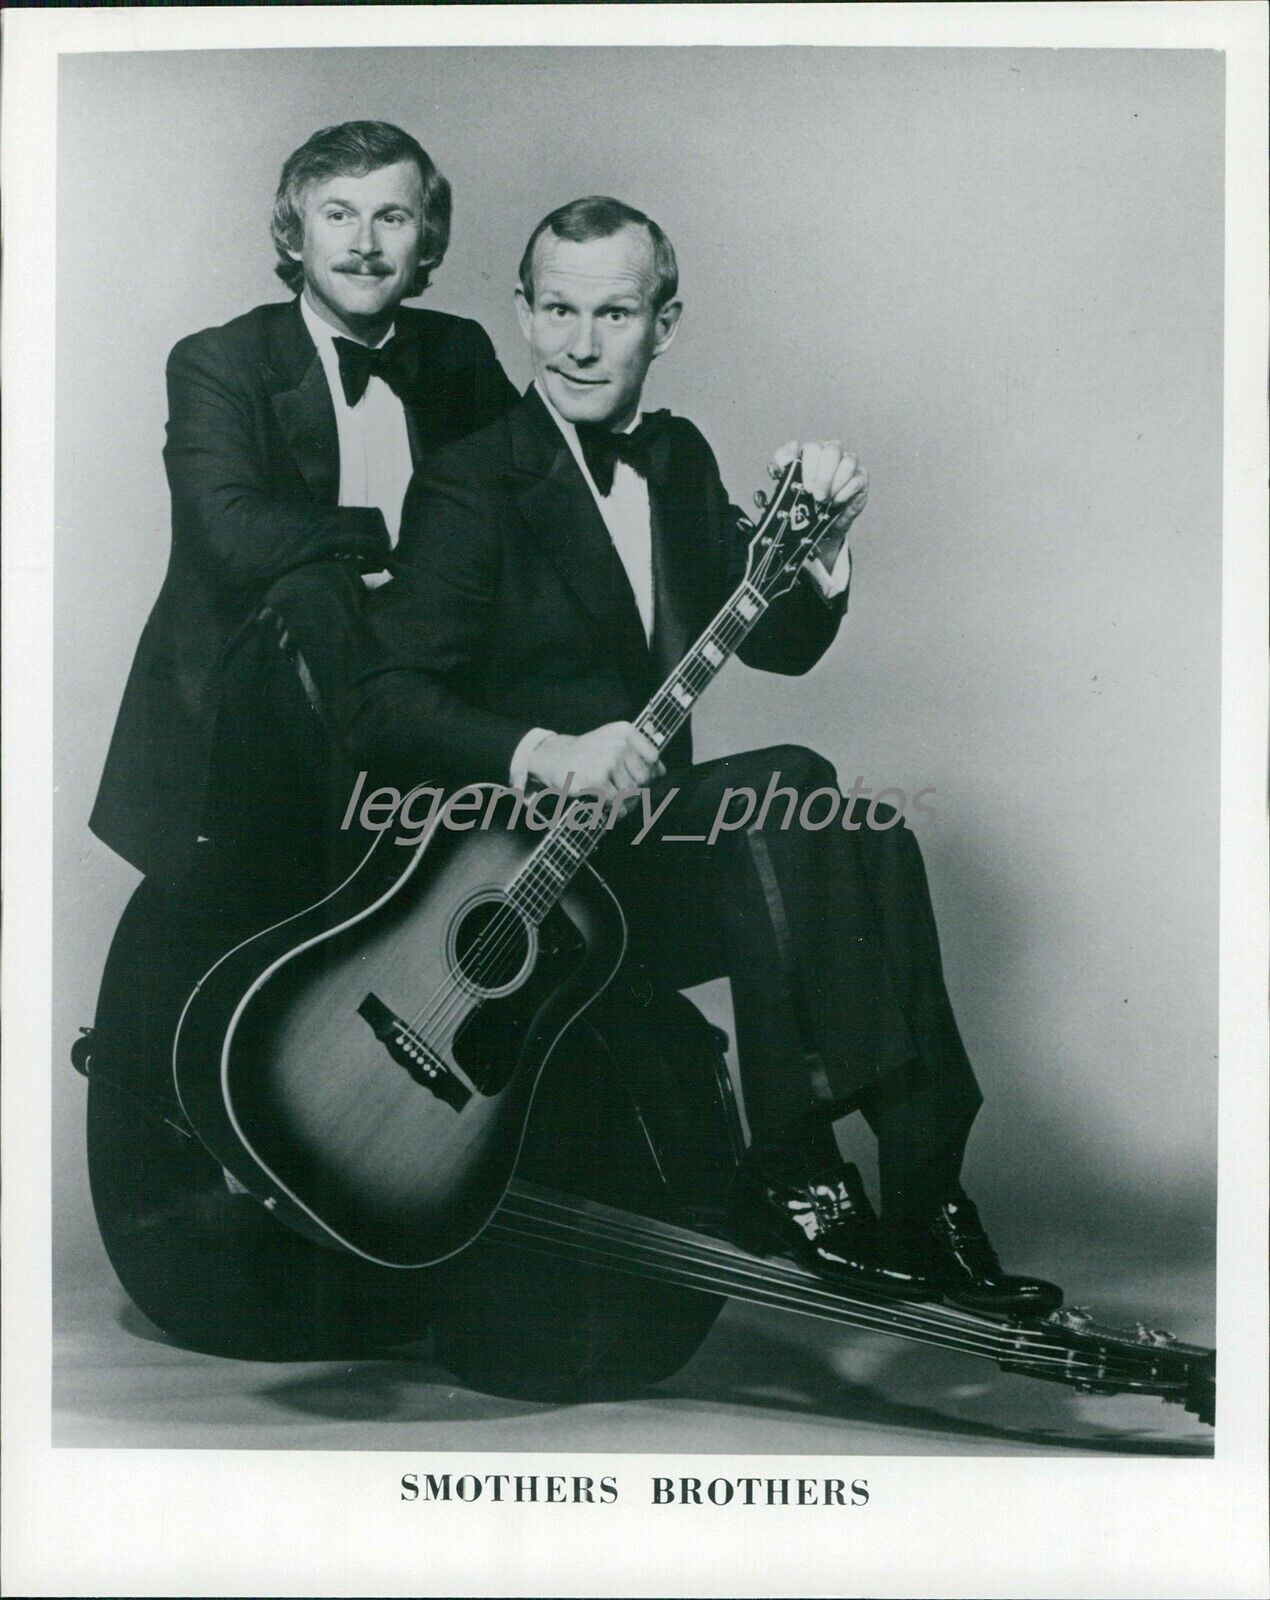 1978 Portrait of Comedians Smothers Brothers Original News Service Photo